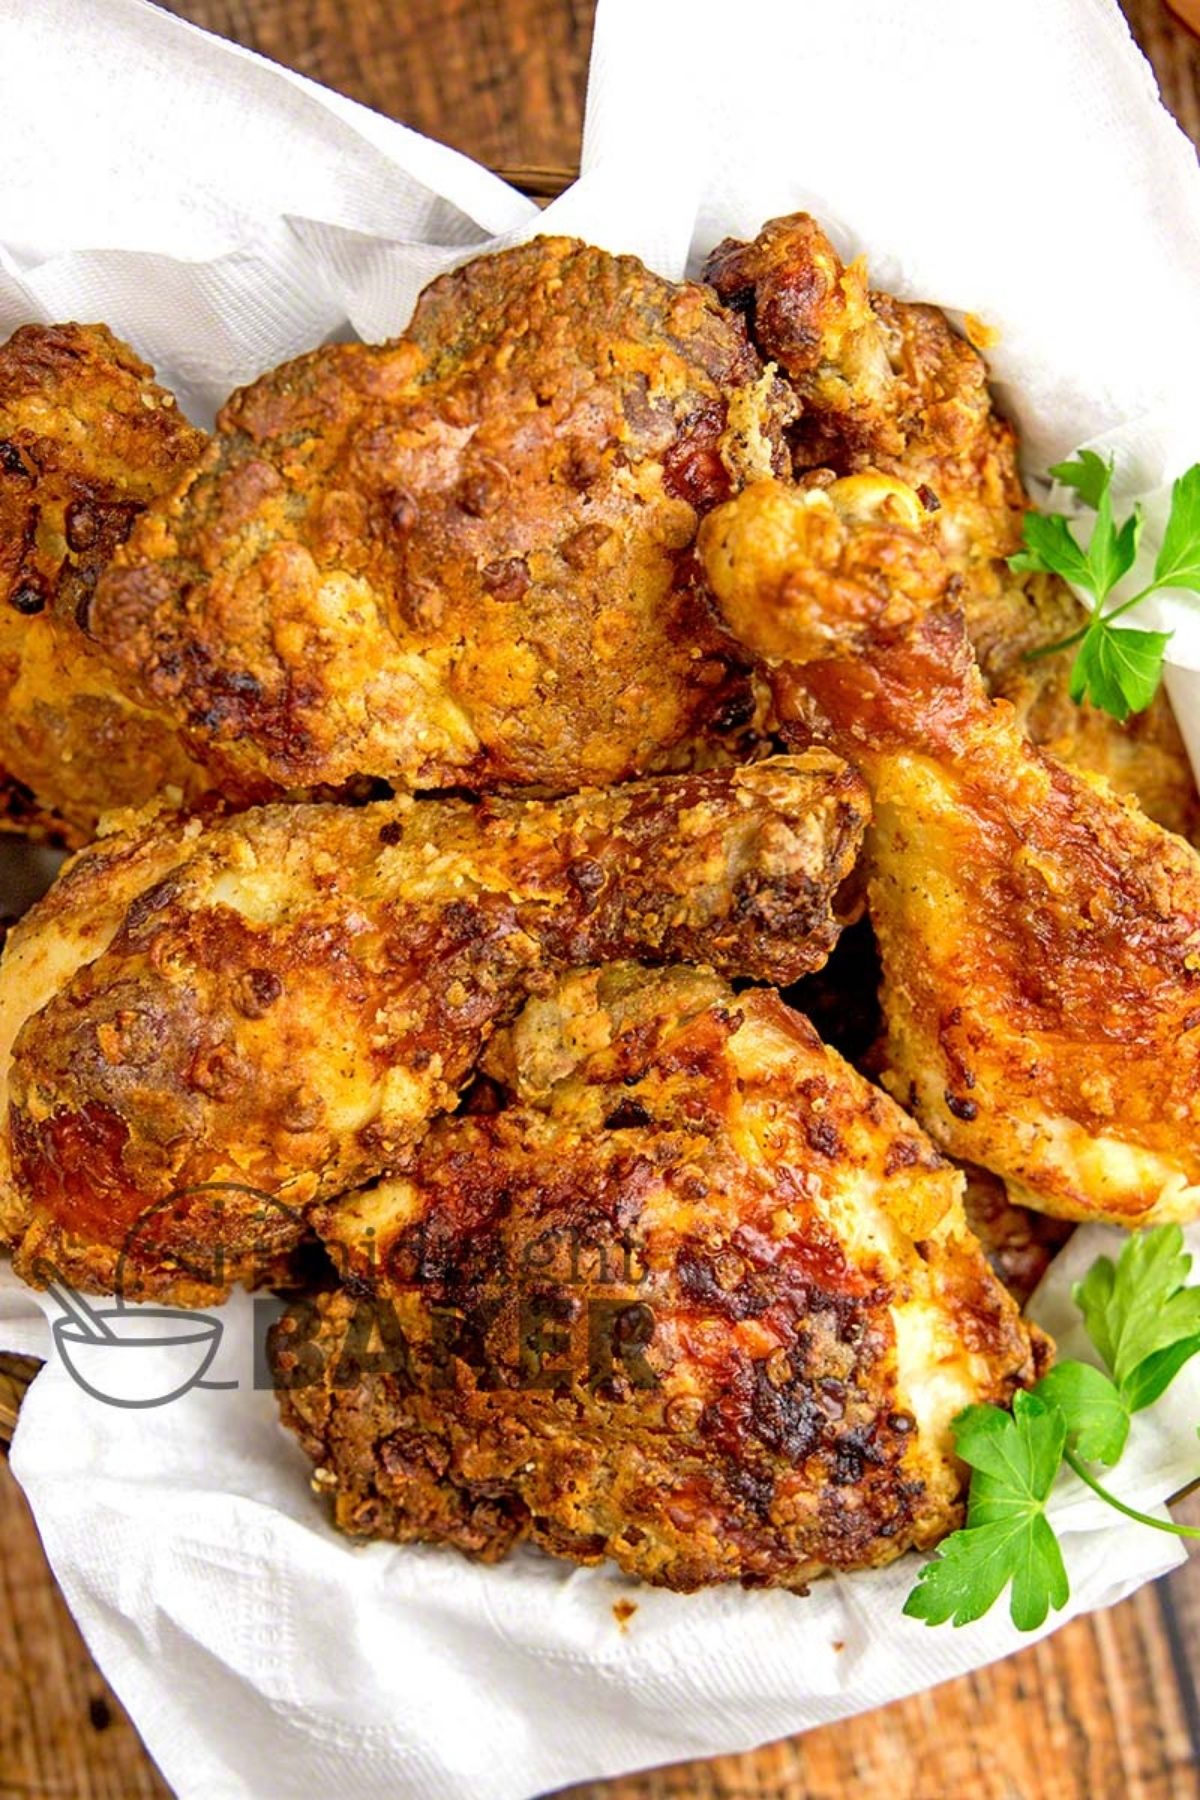 Fried chicken legs in bowl with white napkin